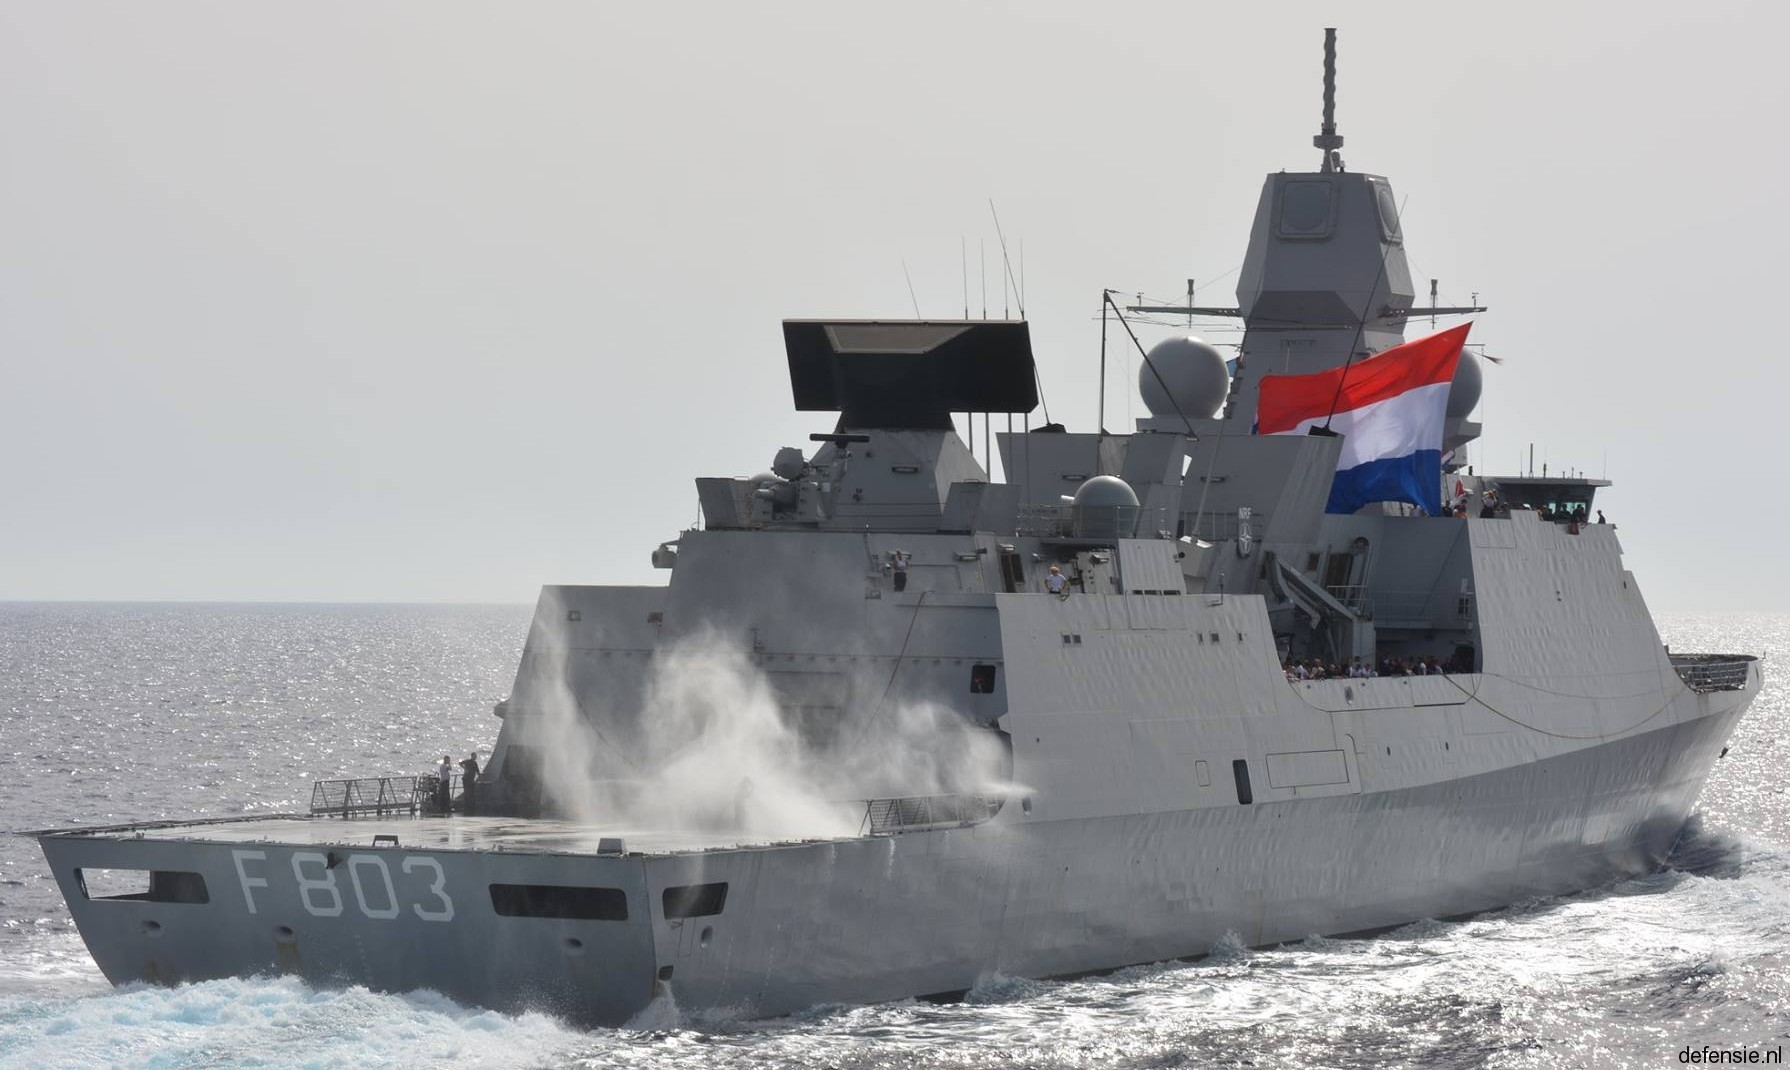 f-803 hnlms tromp guided missile frigate ffg air defense lcf royal netherlands navy 33